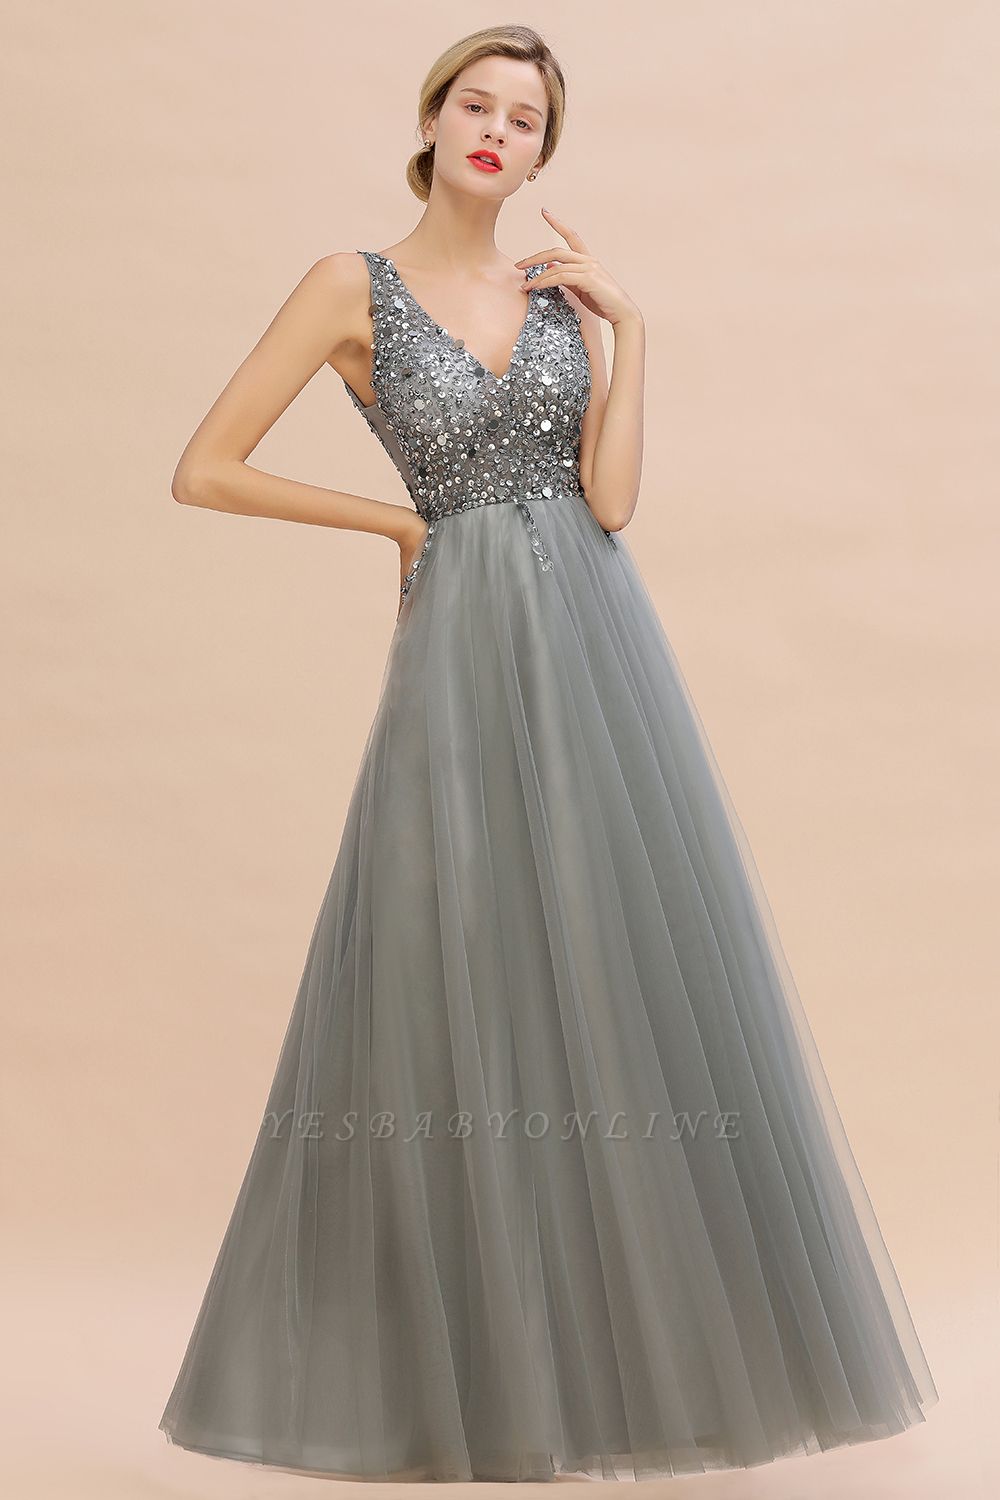 Sleeveless A-line Sequin Tulle Prom Dresses | Cheap Evening Dress ...